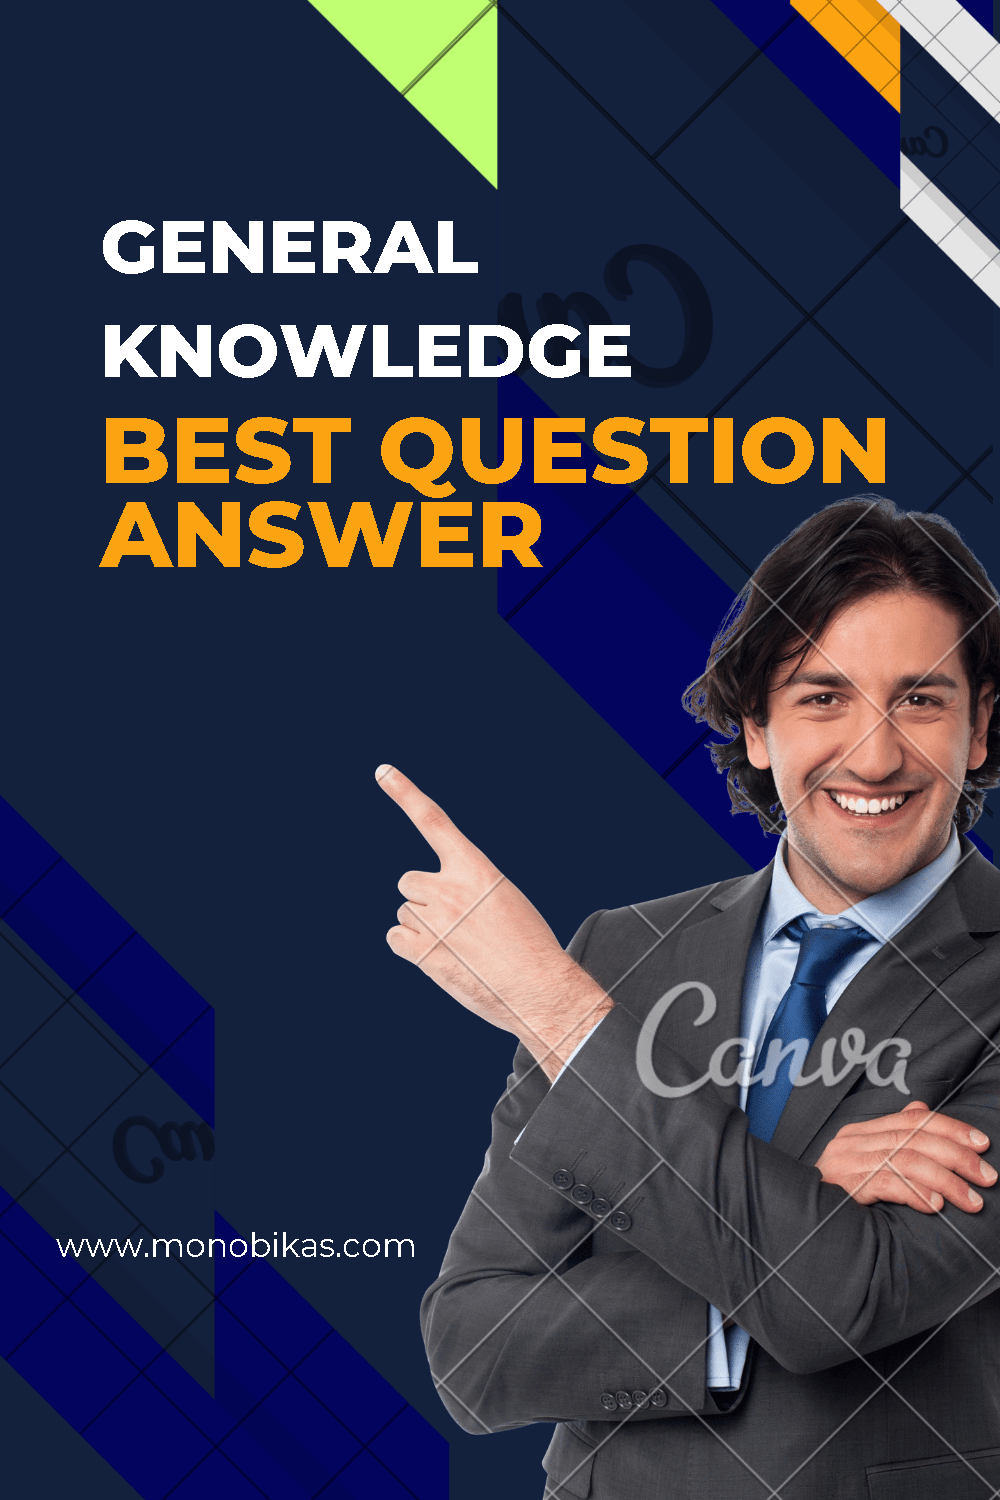 gk best question answer